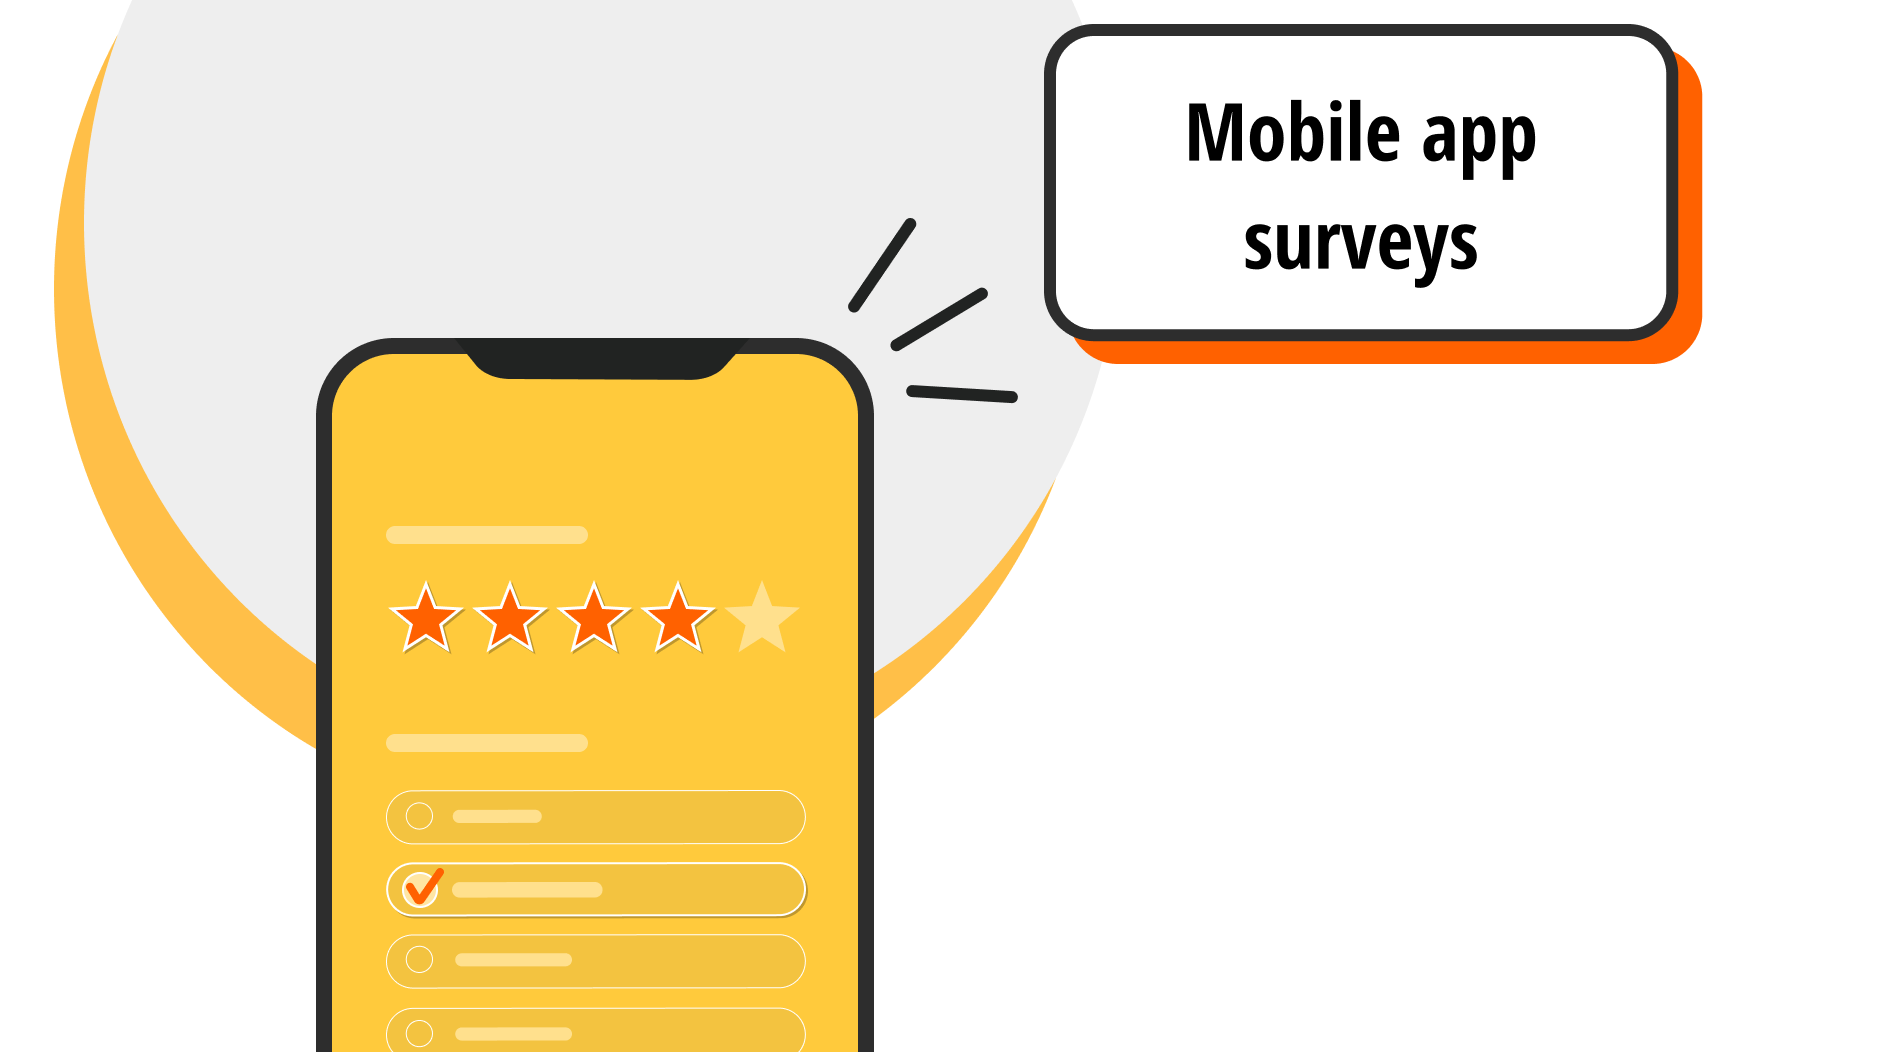 Your guide to mobile app surveys (questions, tips & templates)